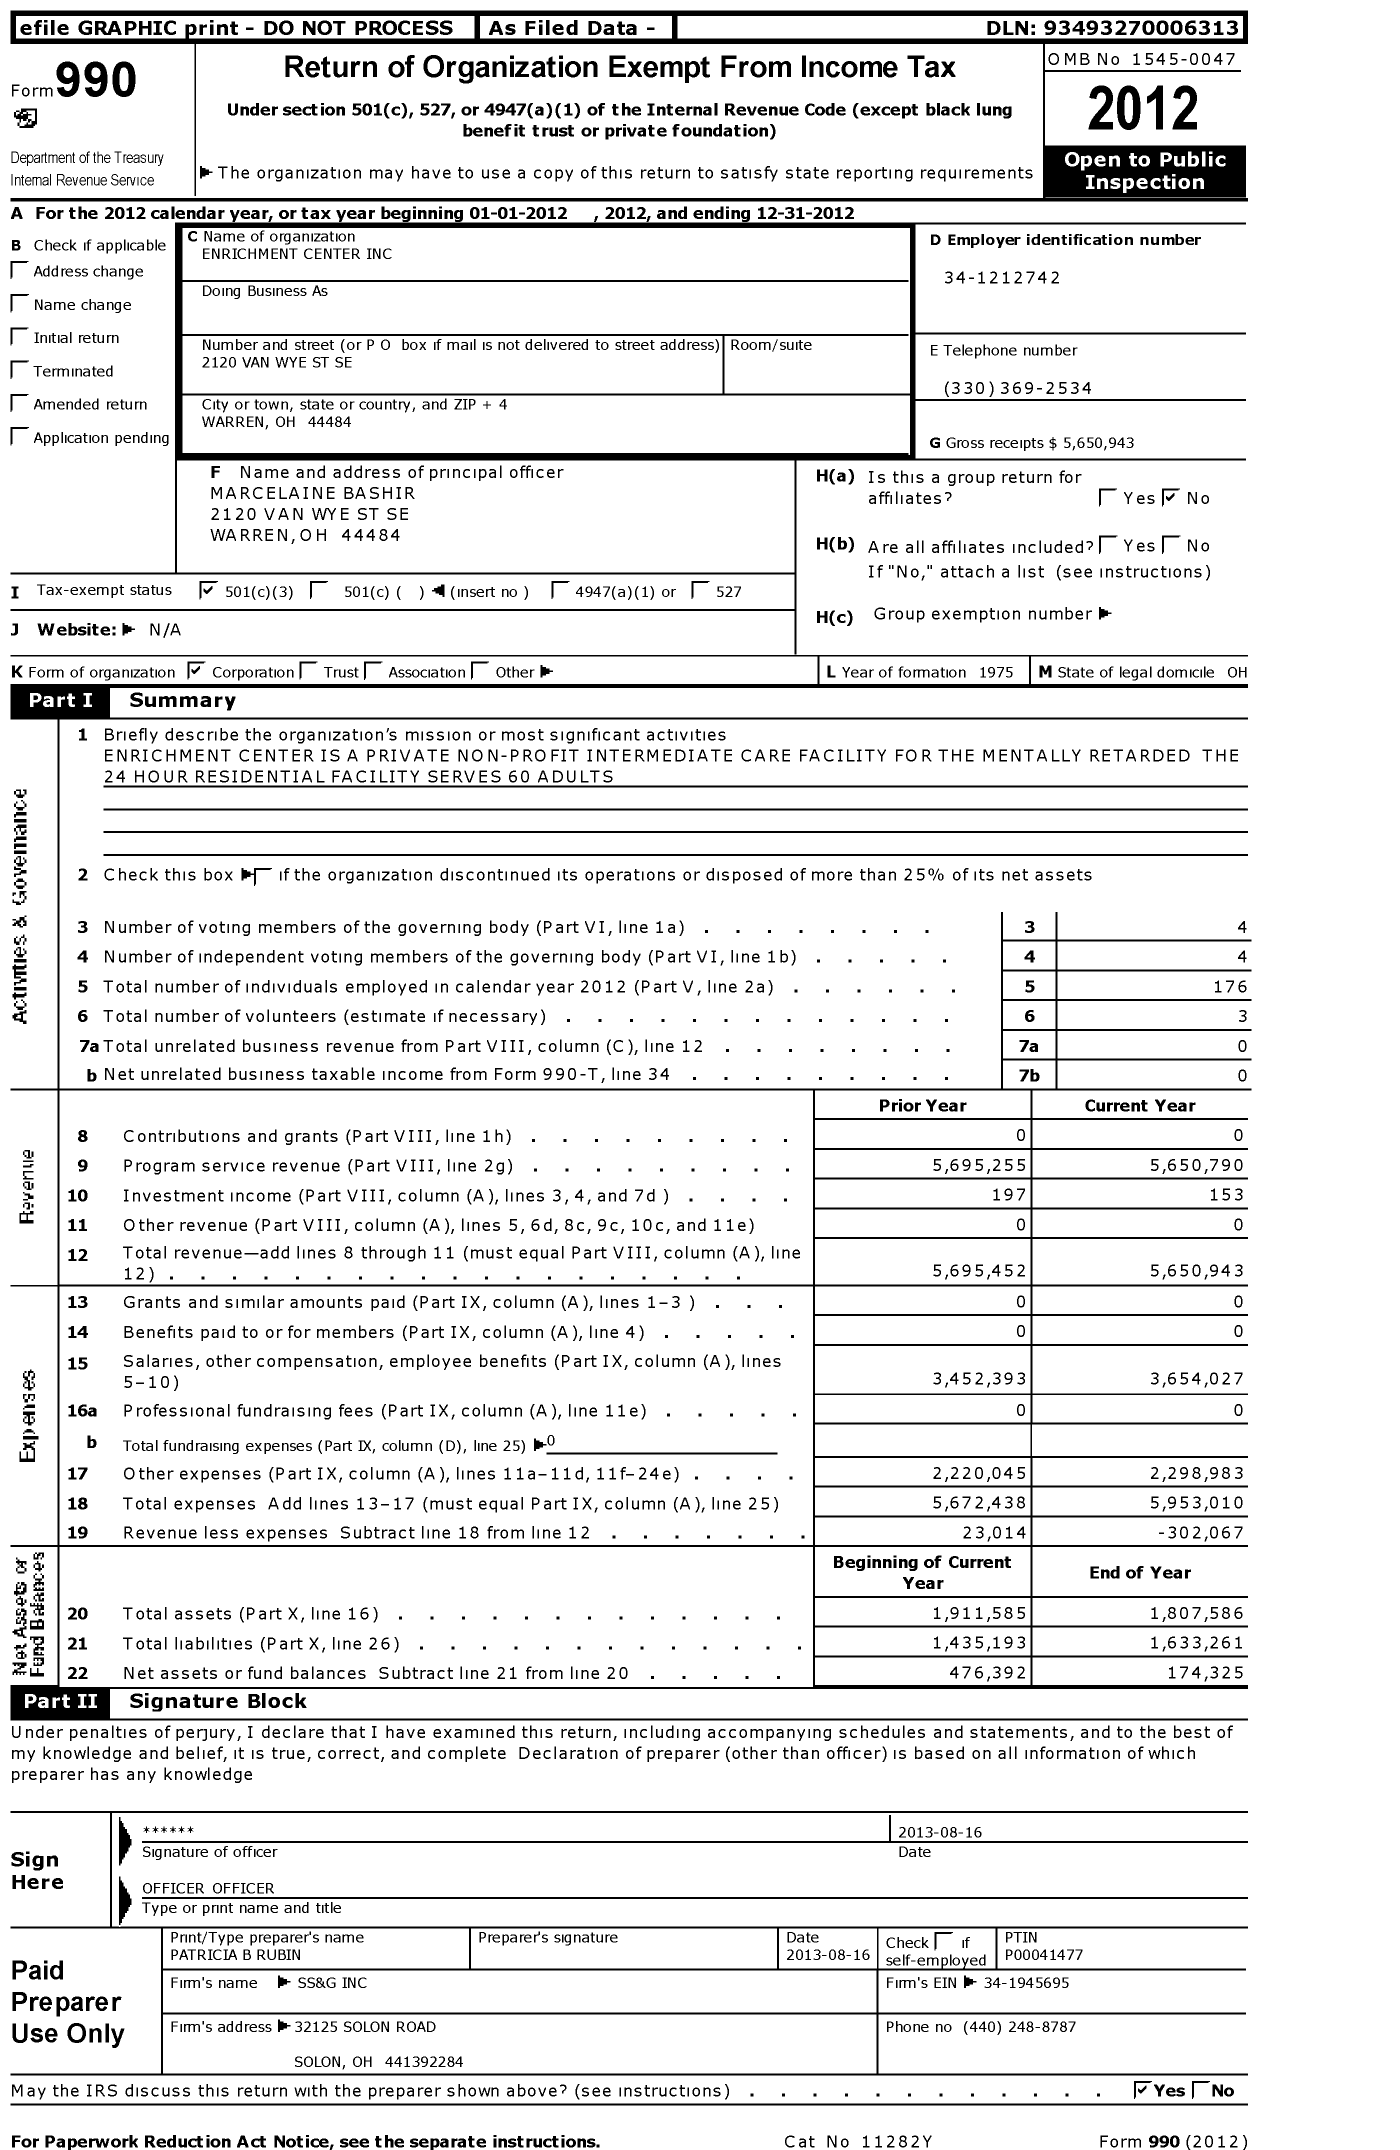 Image of first page of 2012 Form 990 for Enrichment Center